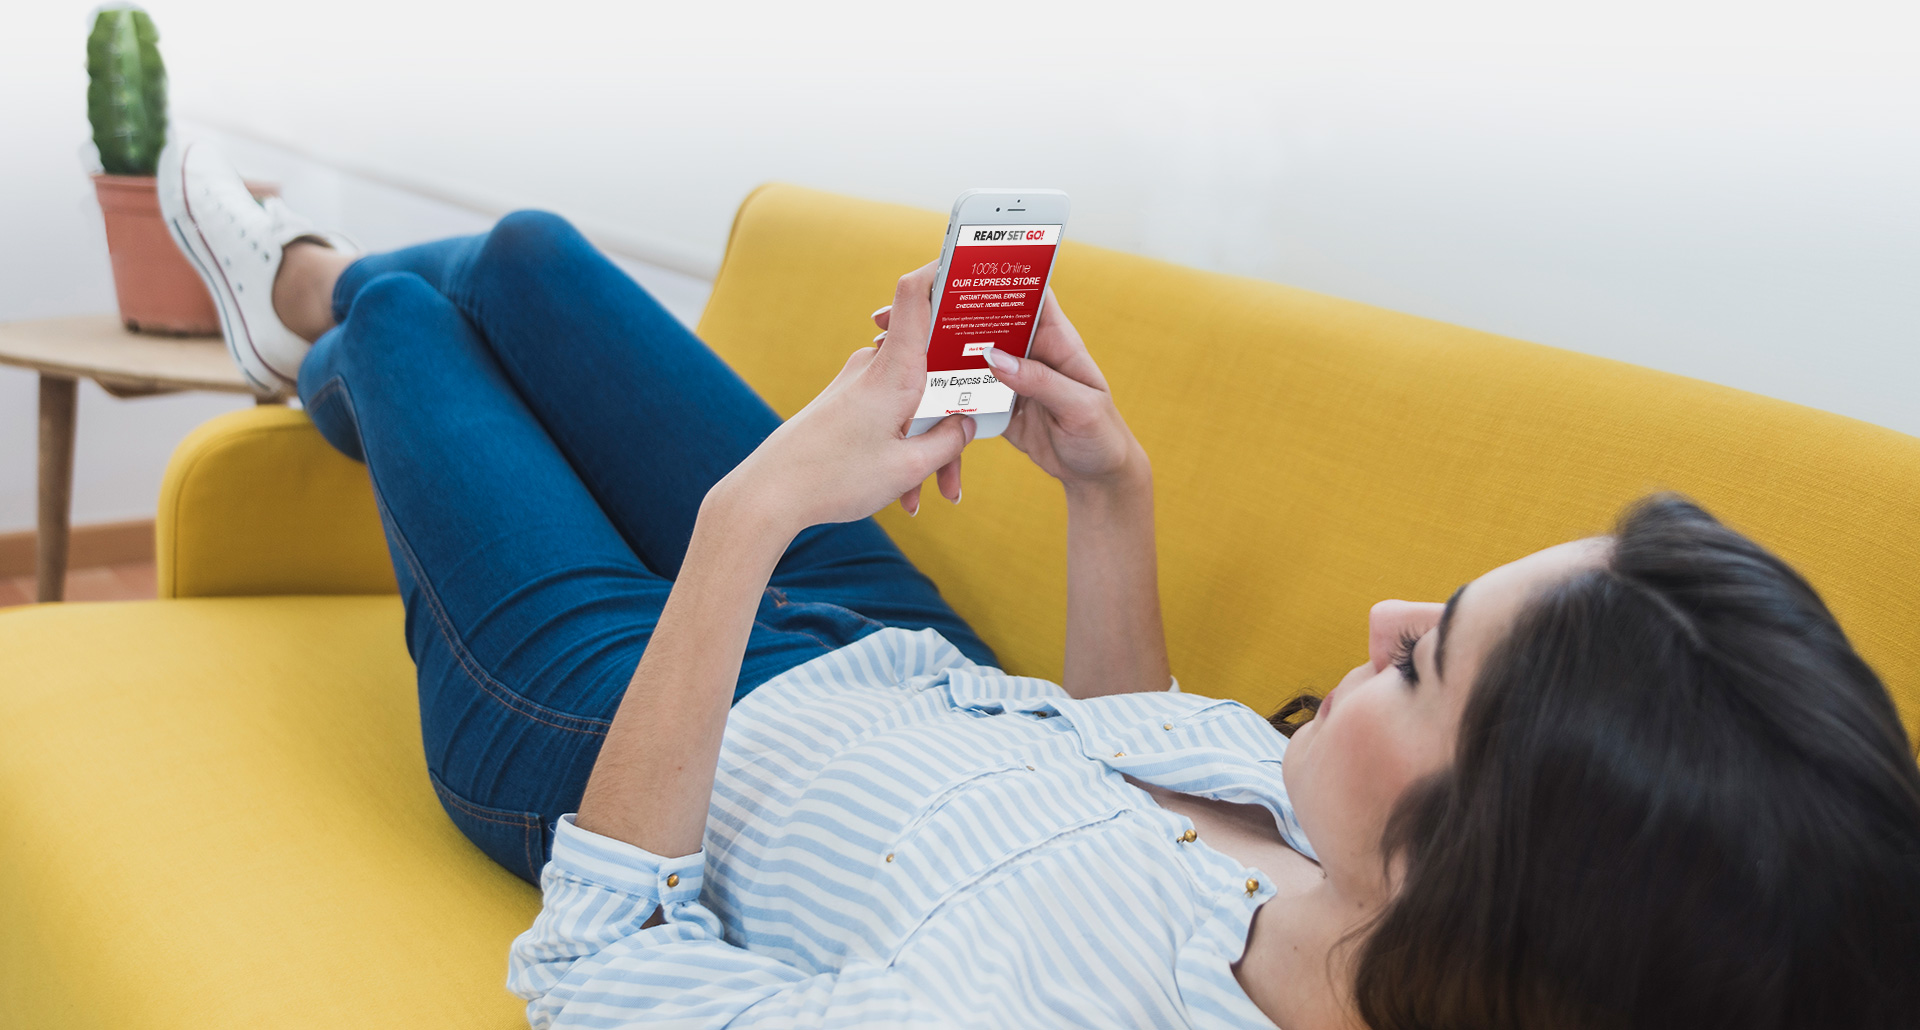 Young woman laying on the couch scrolling through email on phone